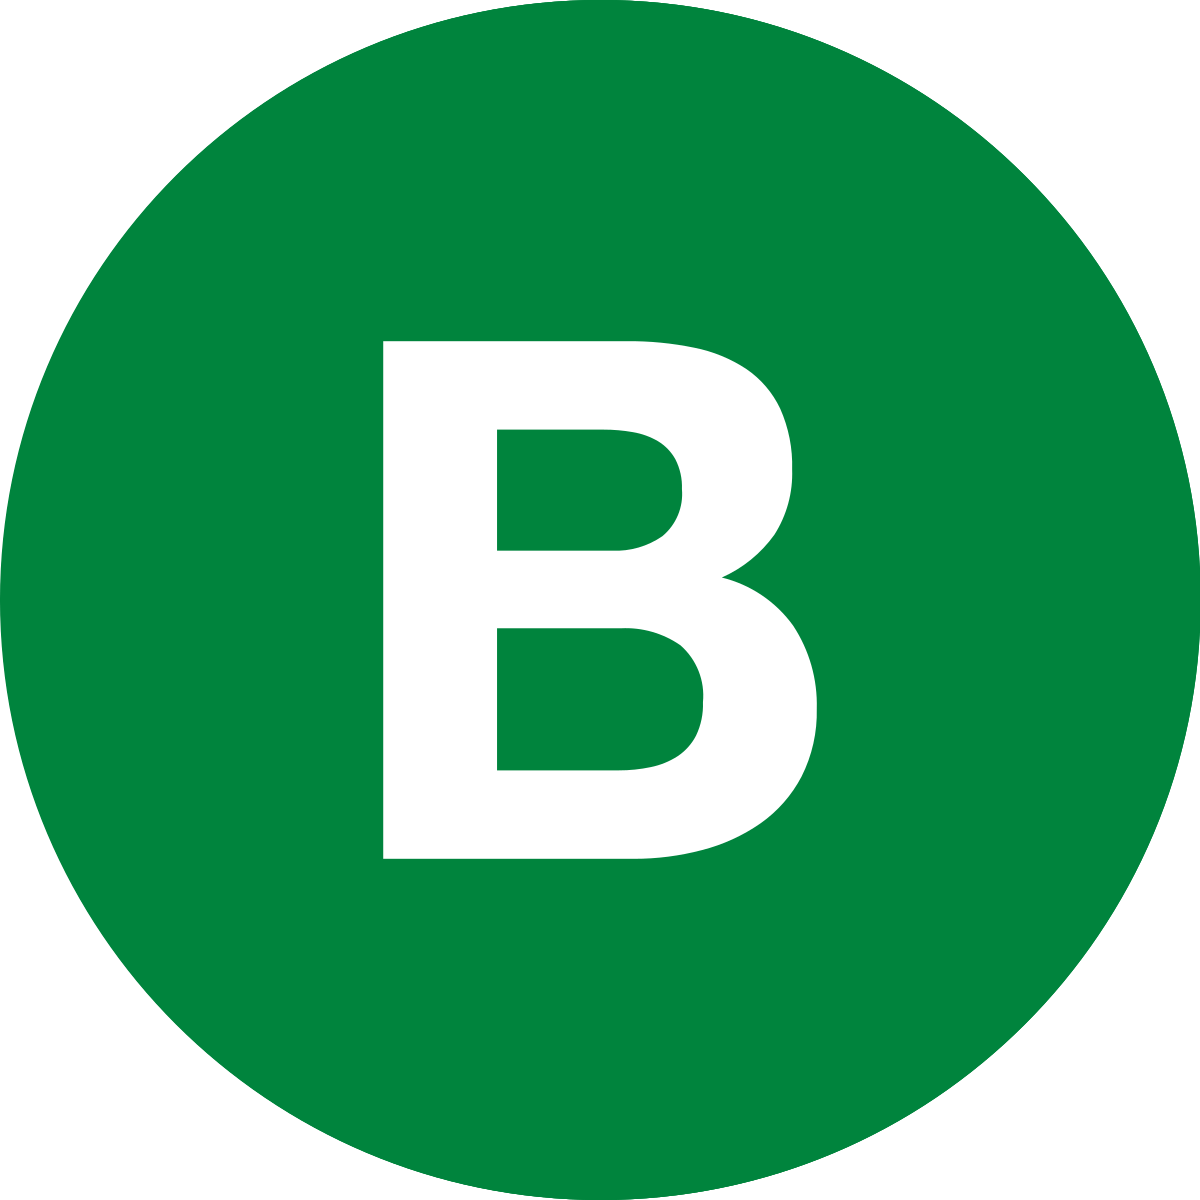 File:Icon-green-line-b-default.svg - Wikimedia Commons